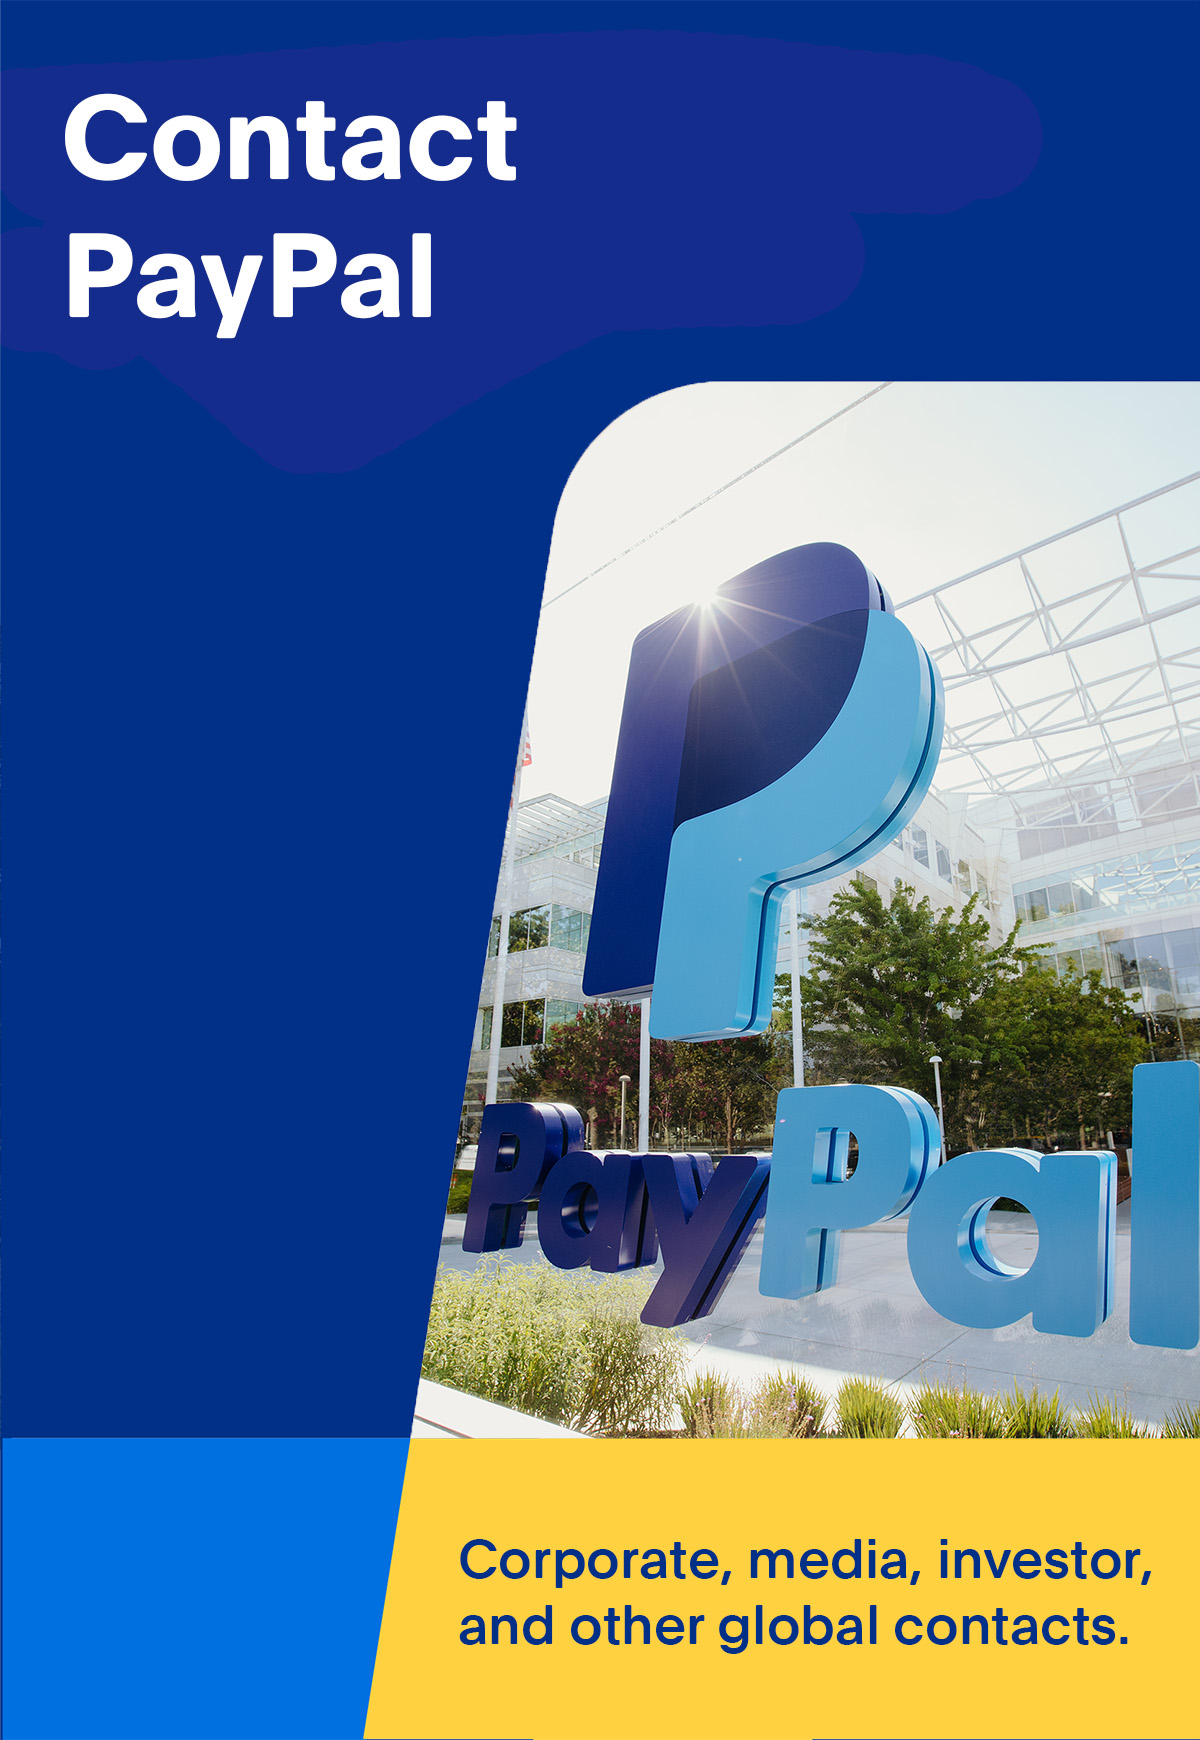 Contact PayPal: Opens in a new window